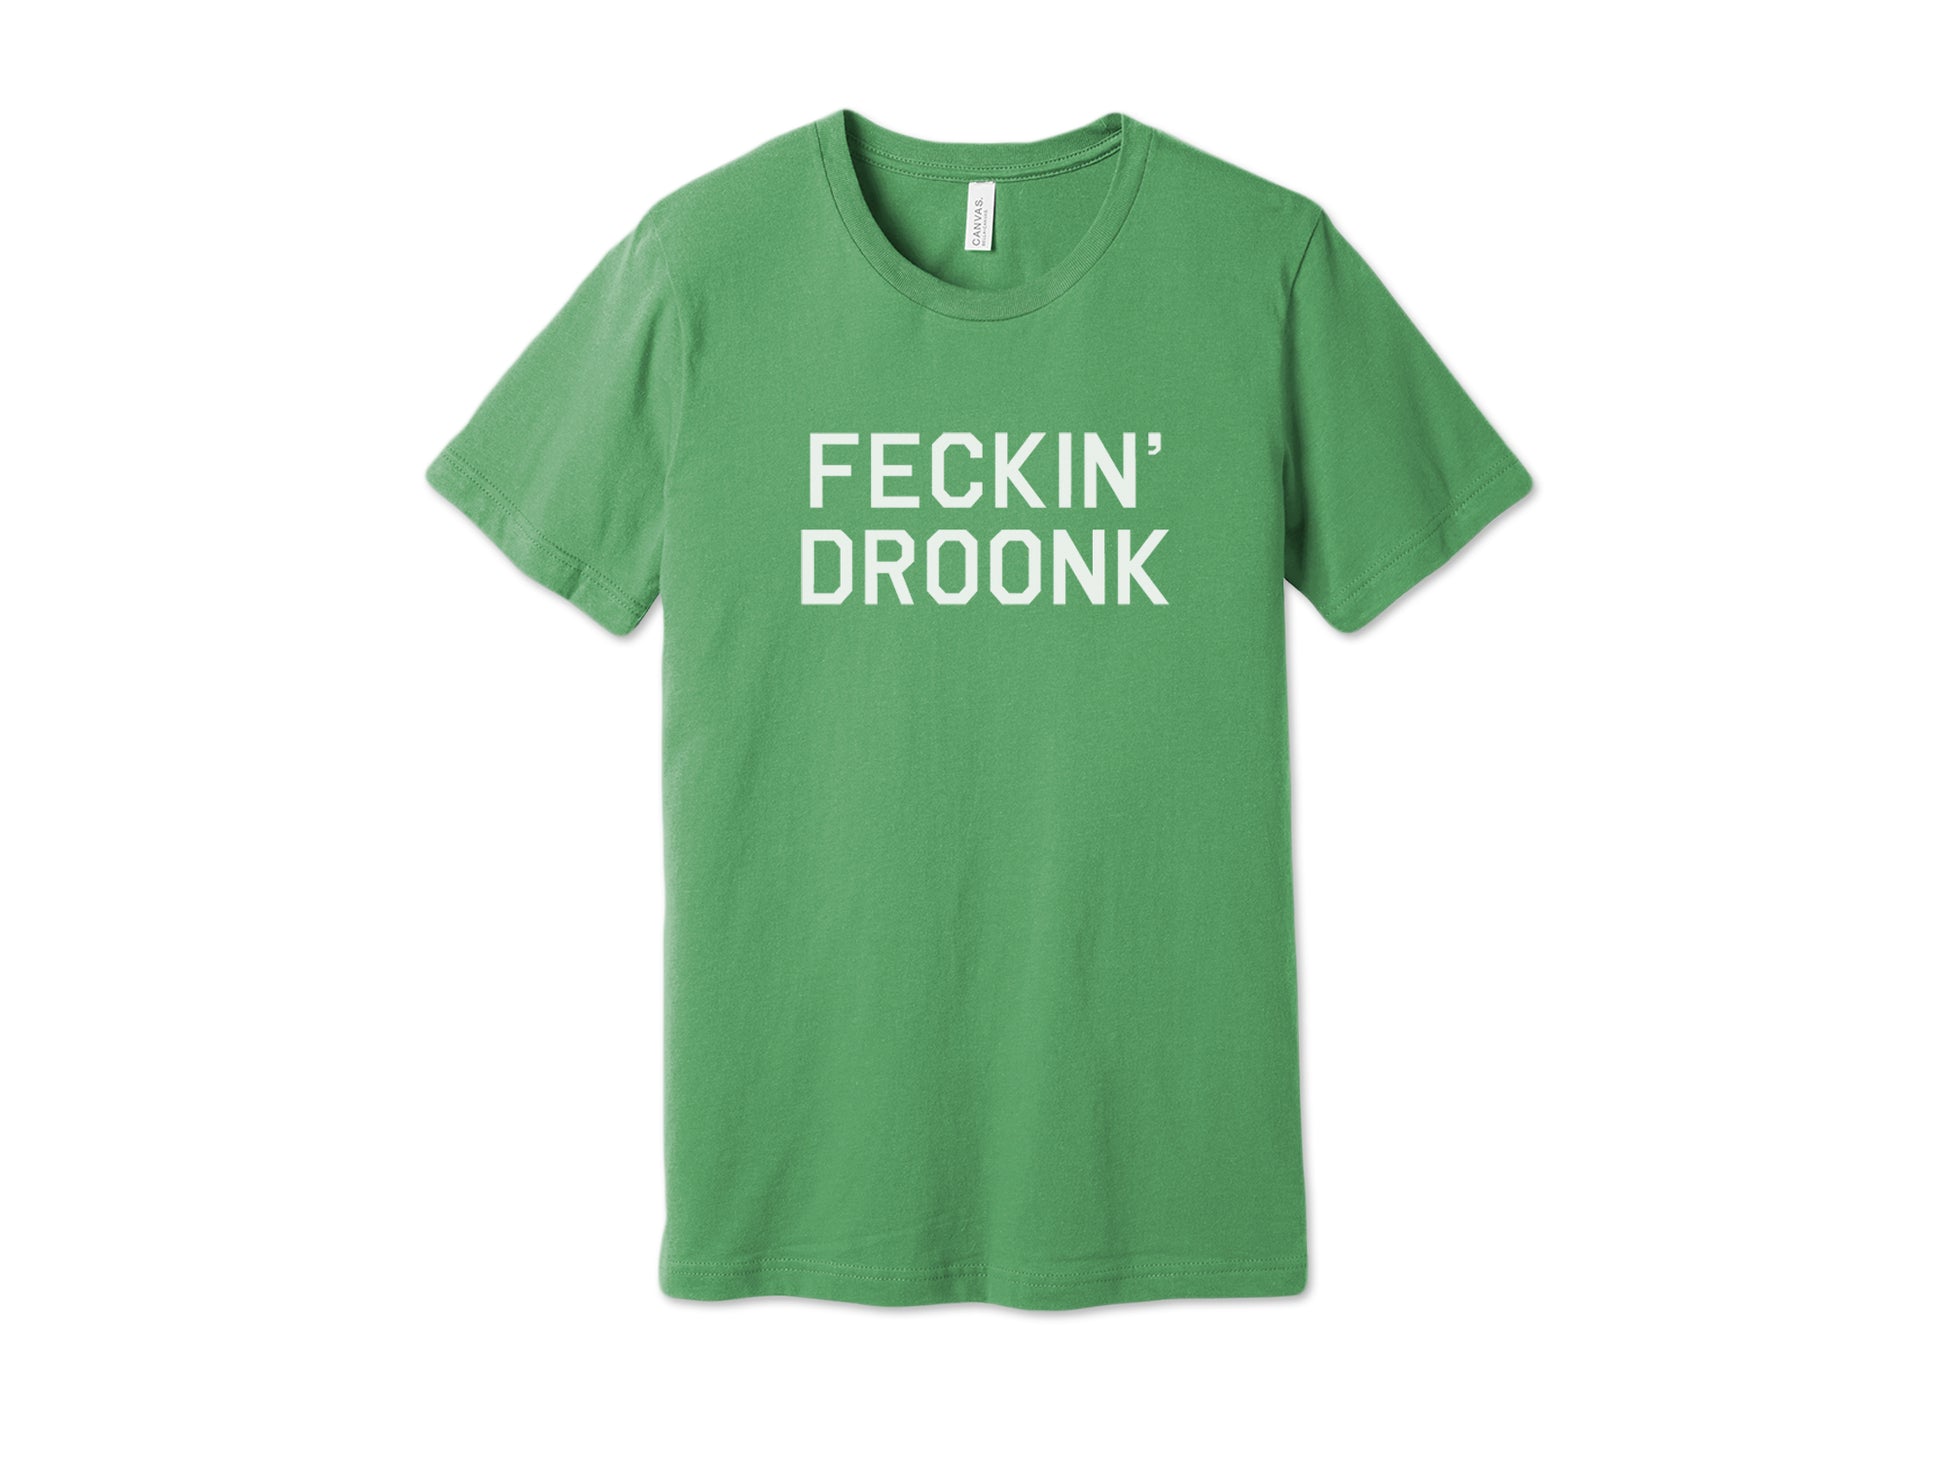 Leaf Green St. Patrick's Day Shirt Feckin' Droonk 